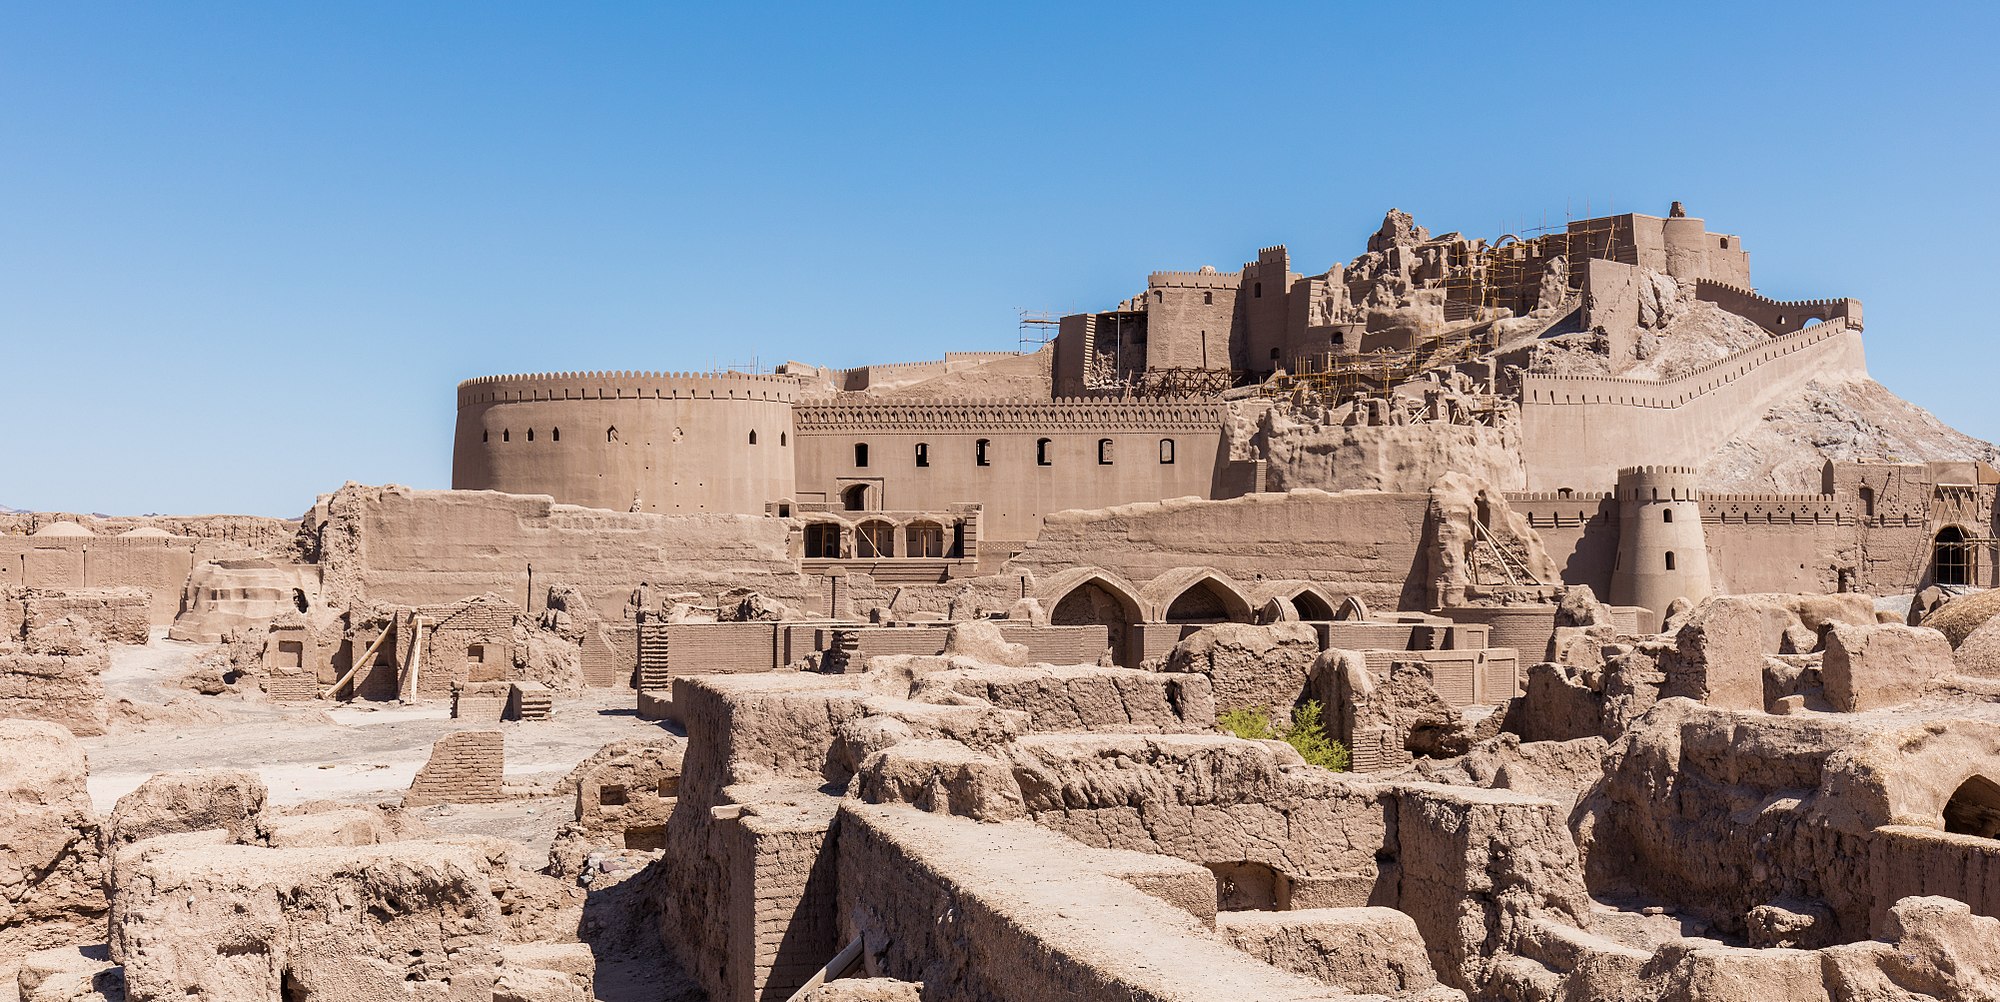 General view of Arg-e Bam, or, Bam Citadel, the largest adobe building in the world and an UNESCO world heritage site, located in Bam, Kerman Province, southeastern Iran.